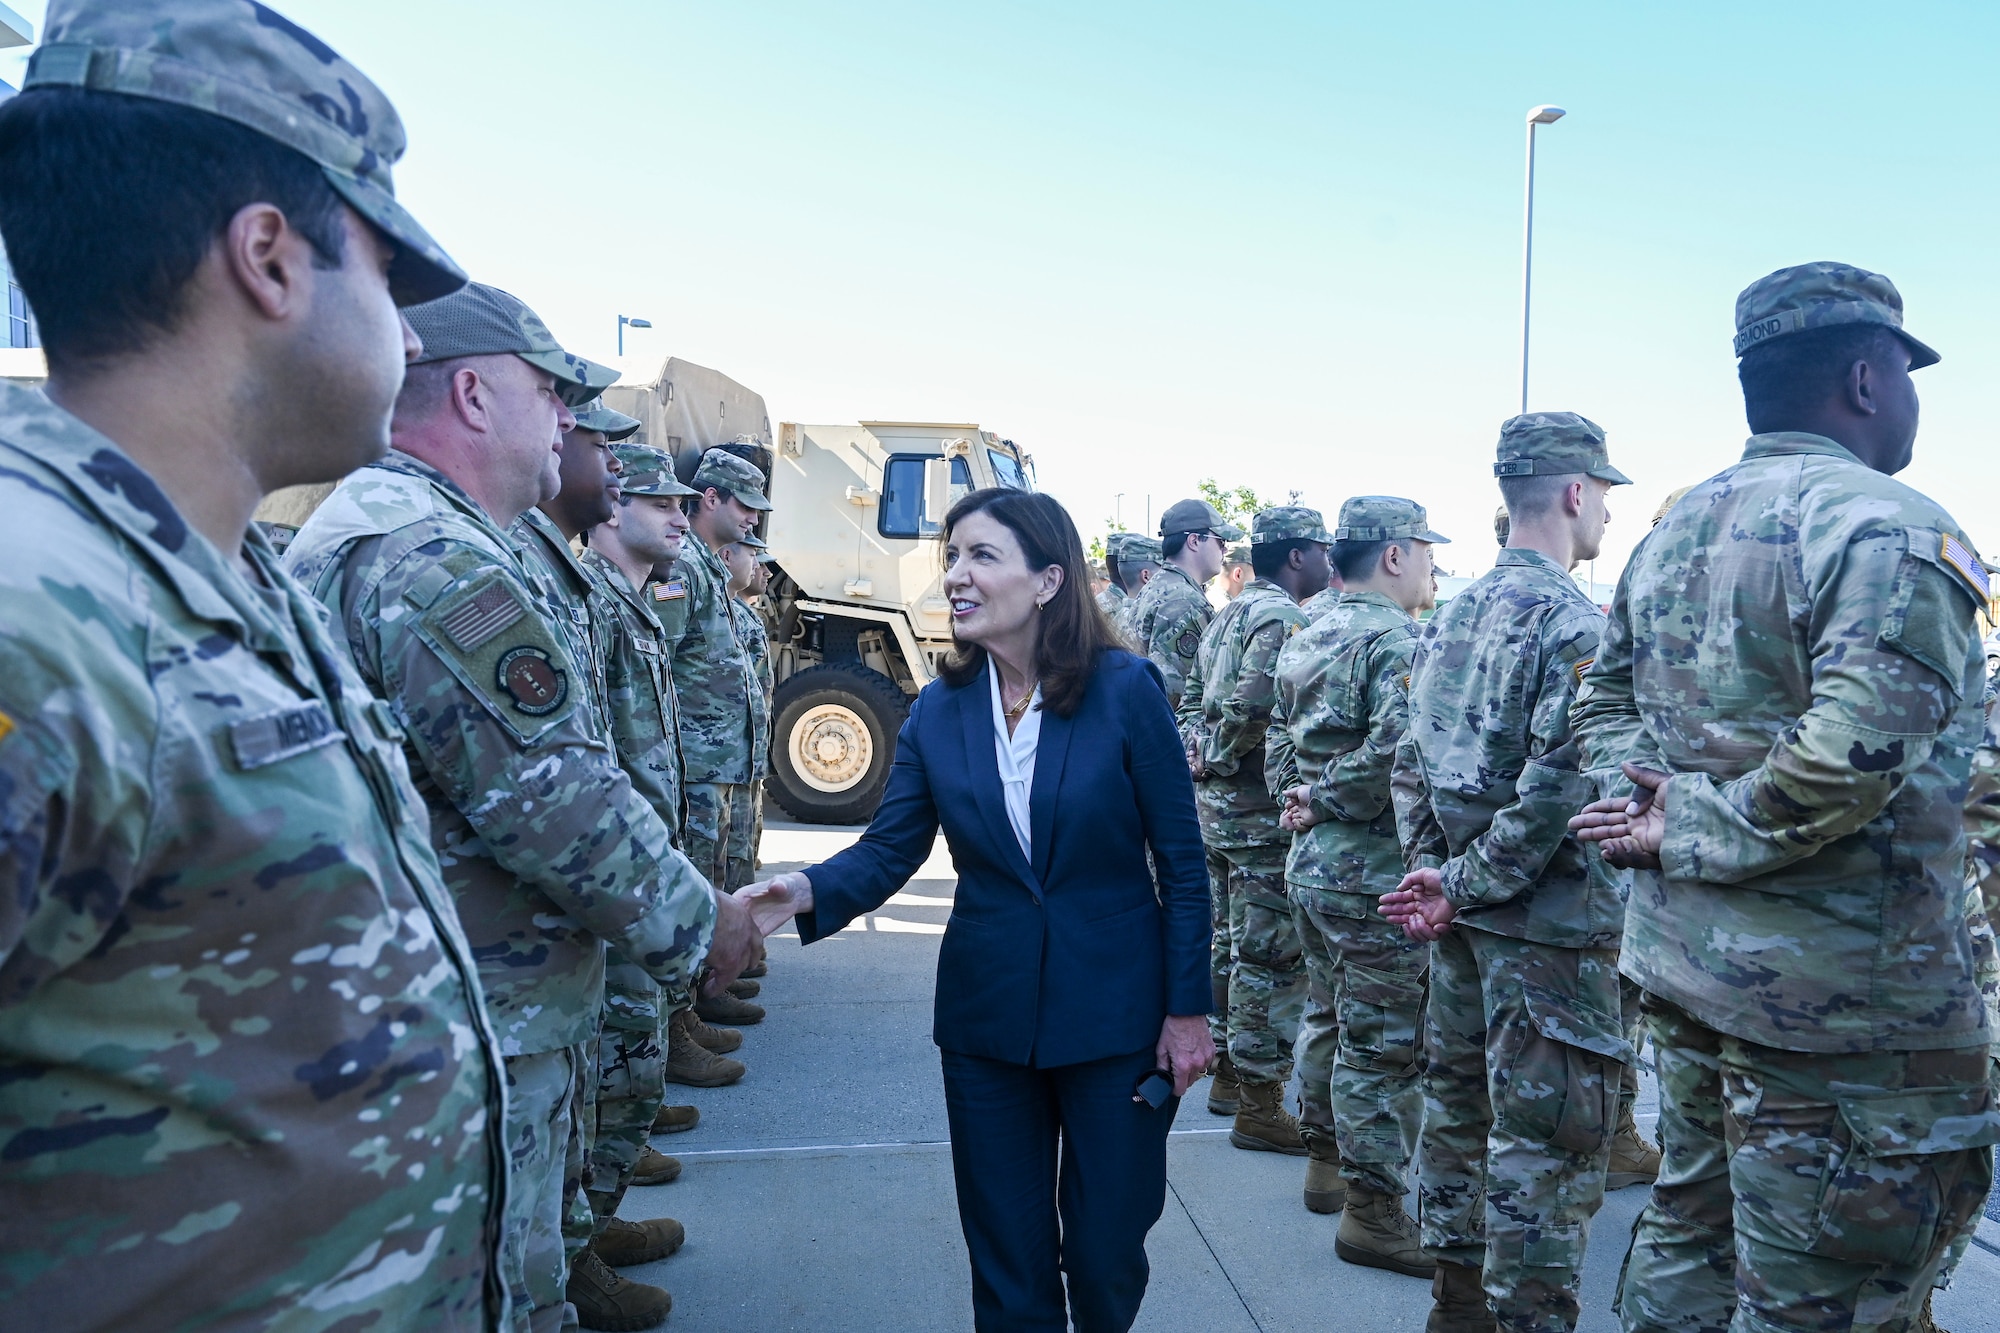 New York Governor Kathy Hochul, greets New York National Guard Soldiers and Airmen she mobilized in case  Hurricane Lee hits Long Island, at the Farmingdale Armed Forces Reserve Center in Farmingdale, New York on Sept. 14, 2023. The governor deployed 50 troops and vehicles out of “an abundance of caution” as the storm made its way north along the East Coast. (U.S. Air National Guard photo by Staff Sgt. Daniel Farrell)